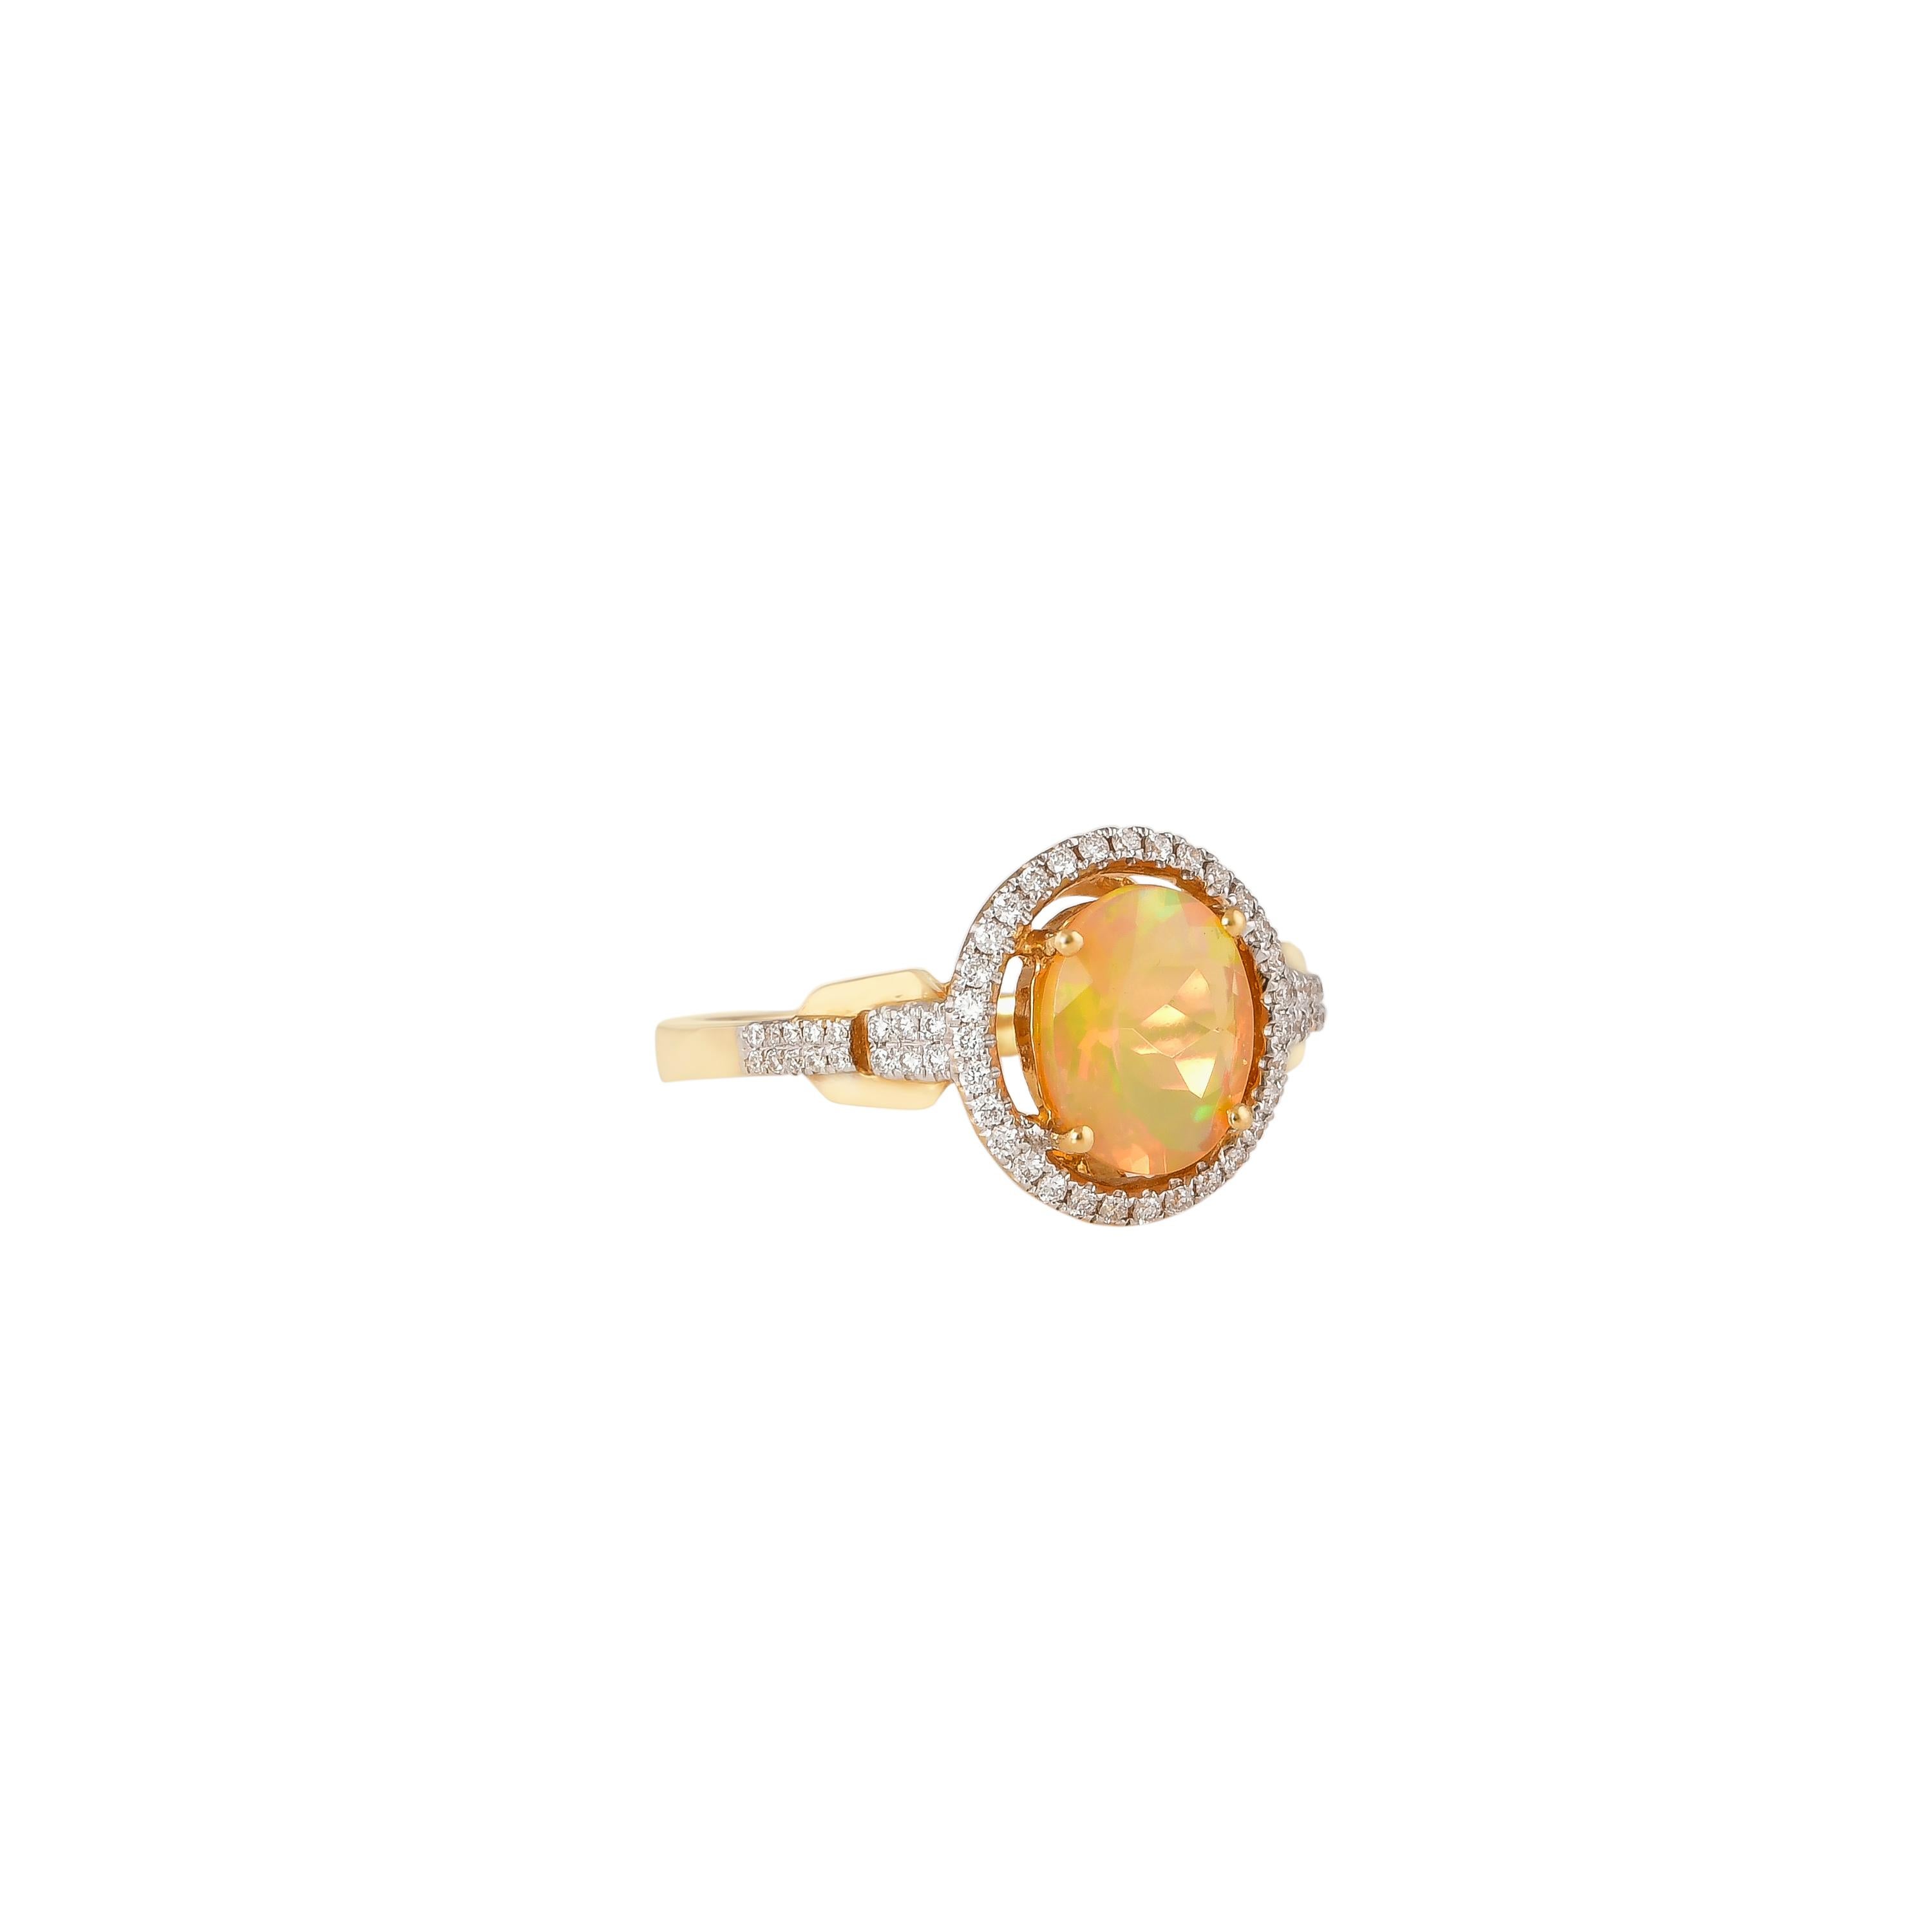 Sunita Nahata uses the most exquisite Ethiopian Opals accented with an dazzling diamonds to accentuate the fire and sparkle within these colorful opals. These gorgeous gemstones are set in yellow gold to strike a true royal feel to these rings.